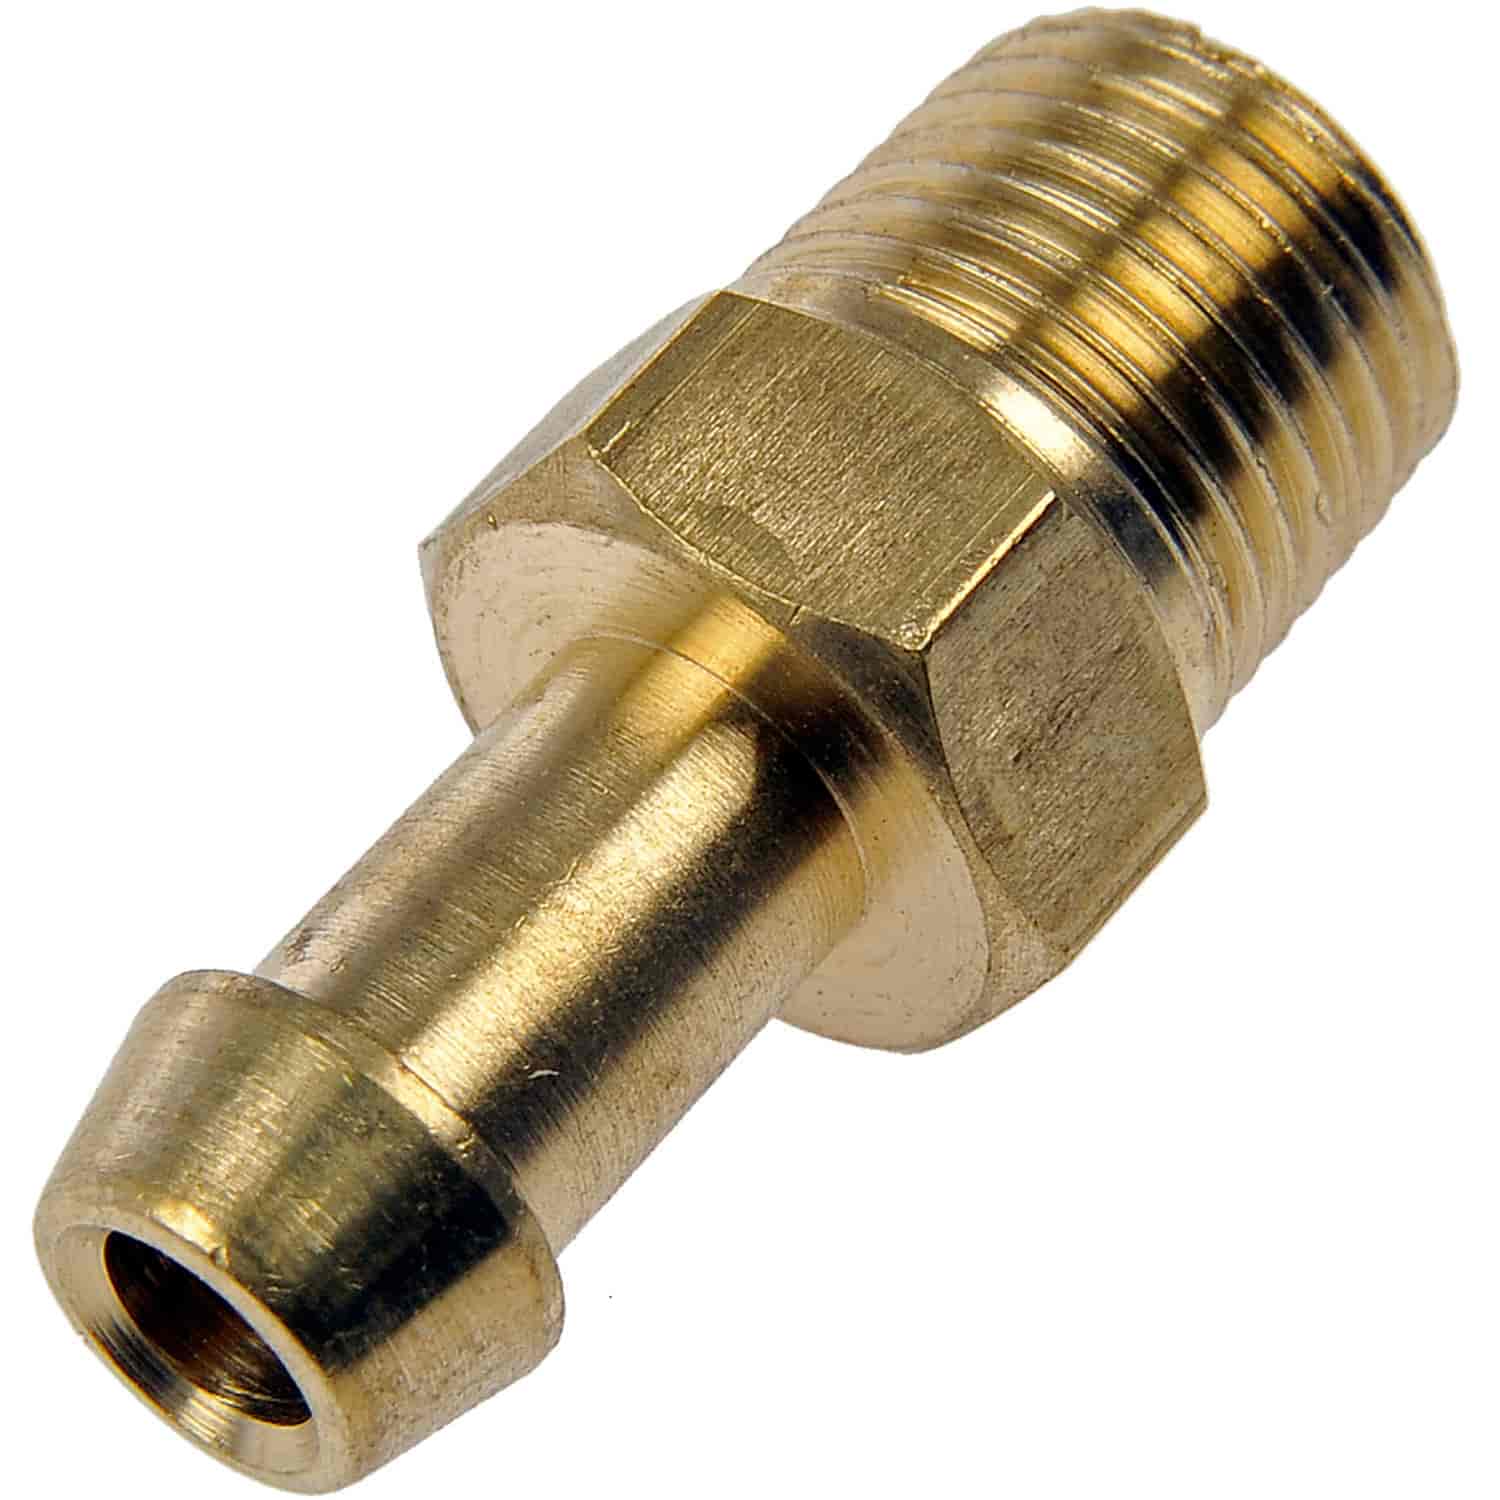 Fuel Hose Fitting-Male Connector-1/4 In. x 1/8 In. MNPT